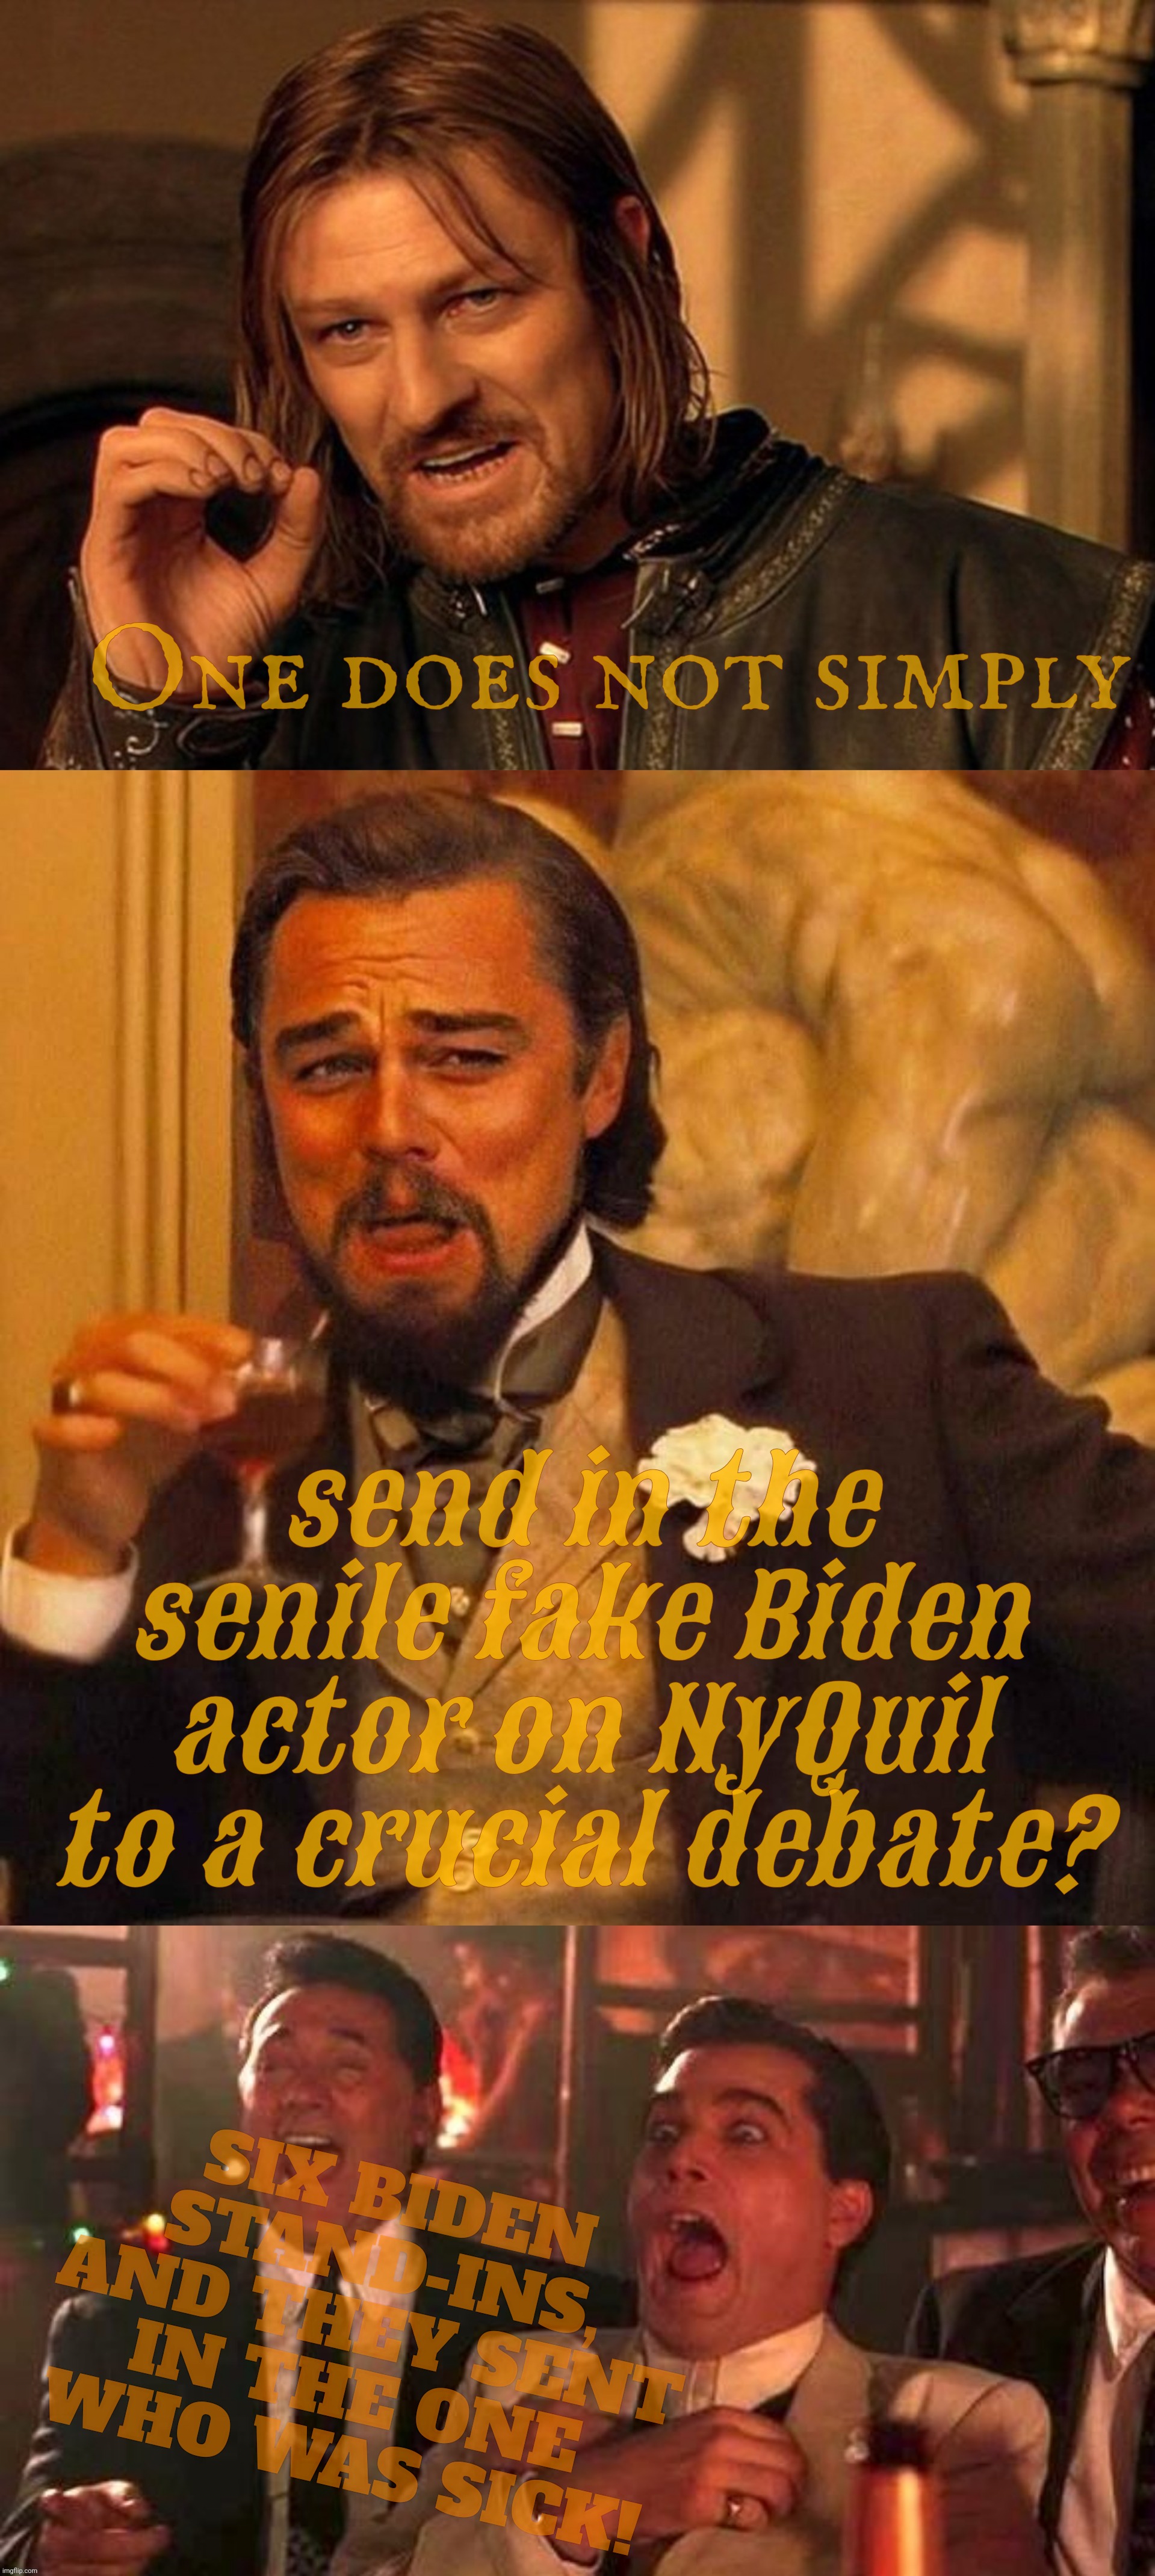 One does not simply SIX BIDEN STAND-INS, AND THEY SENT IN THE ONE WHO WAS SICK! send in the senile fake Biden actor on NyQuil to a crucial d | made w/ Imgflip meme maker